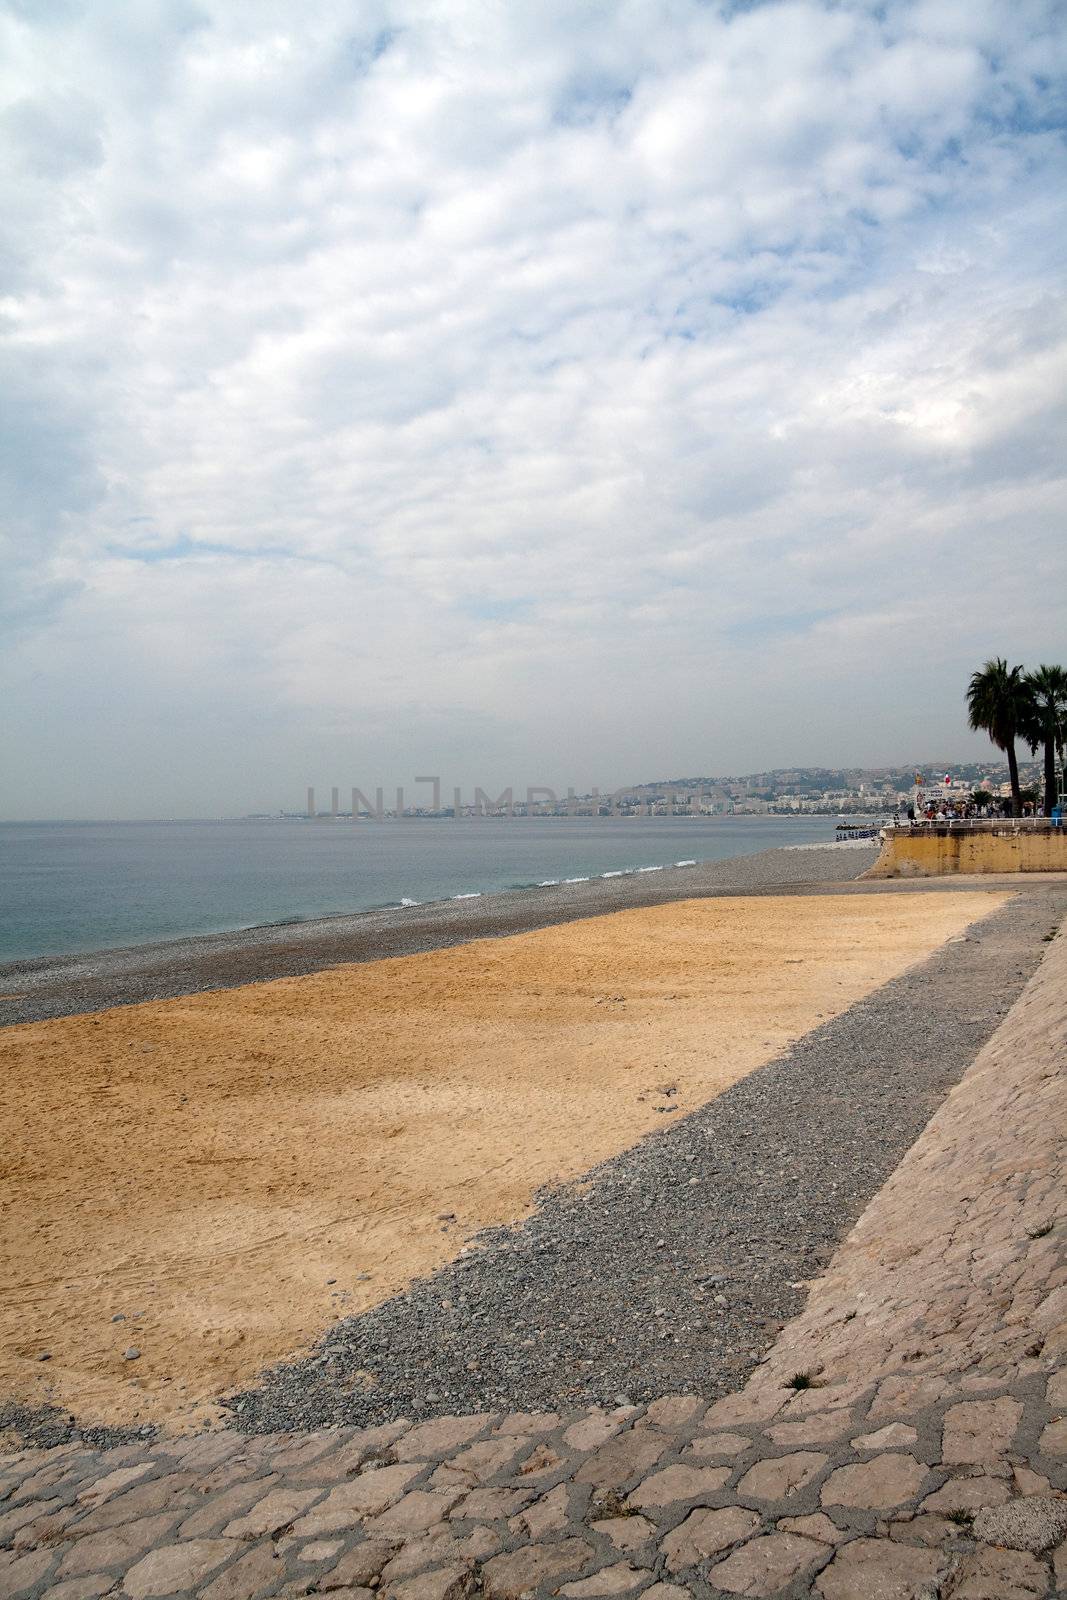 The sandy and rocky beach in Nice, France